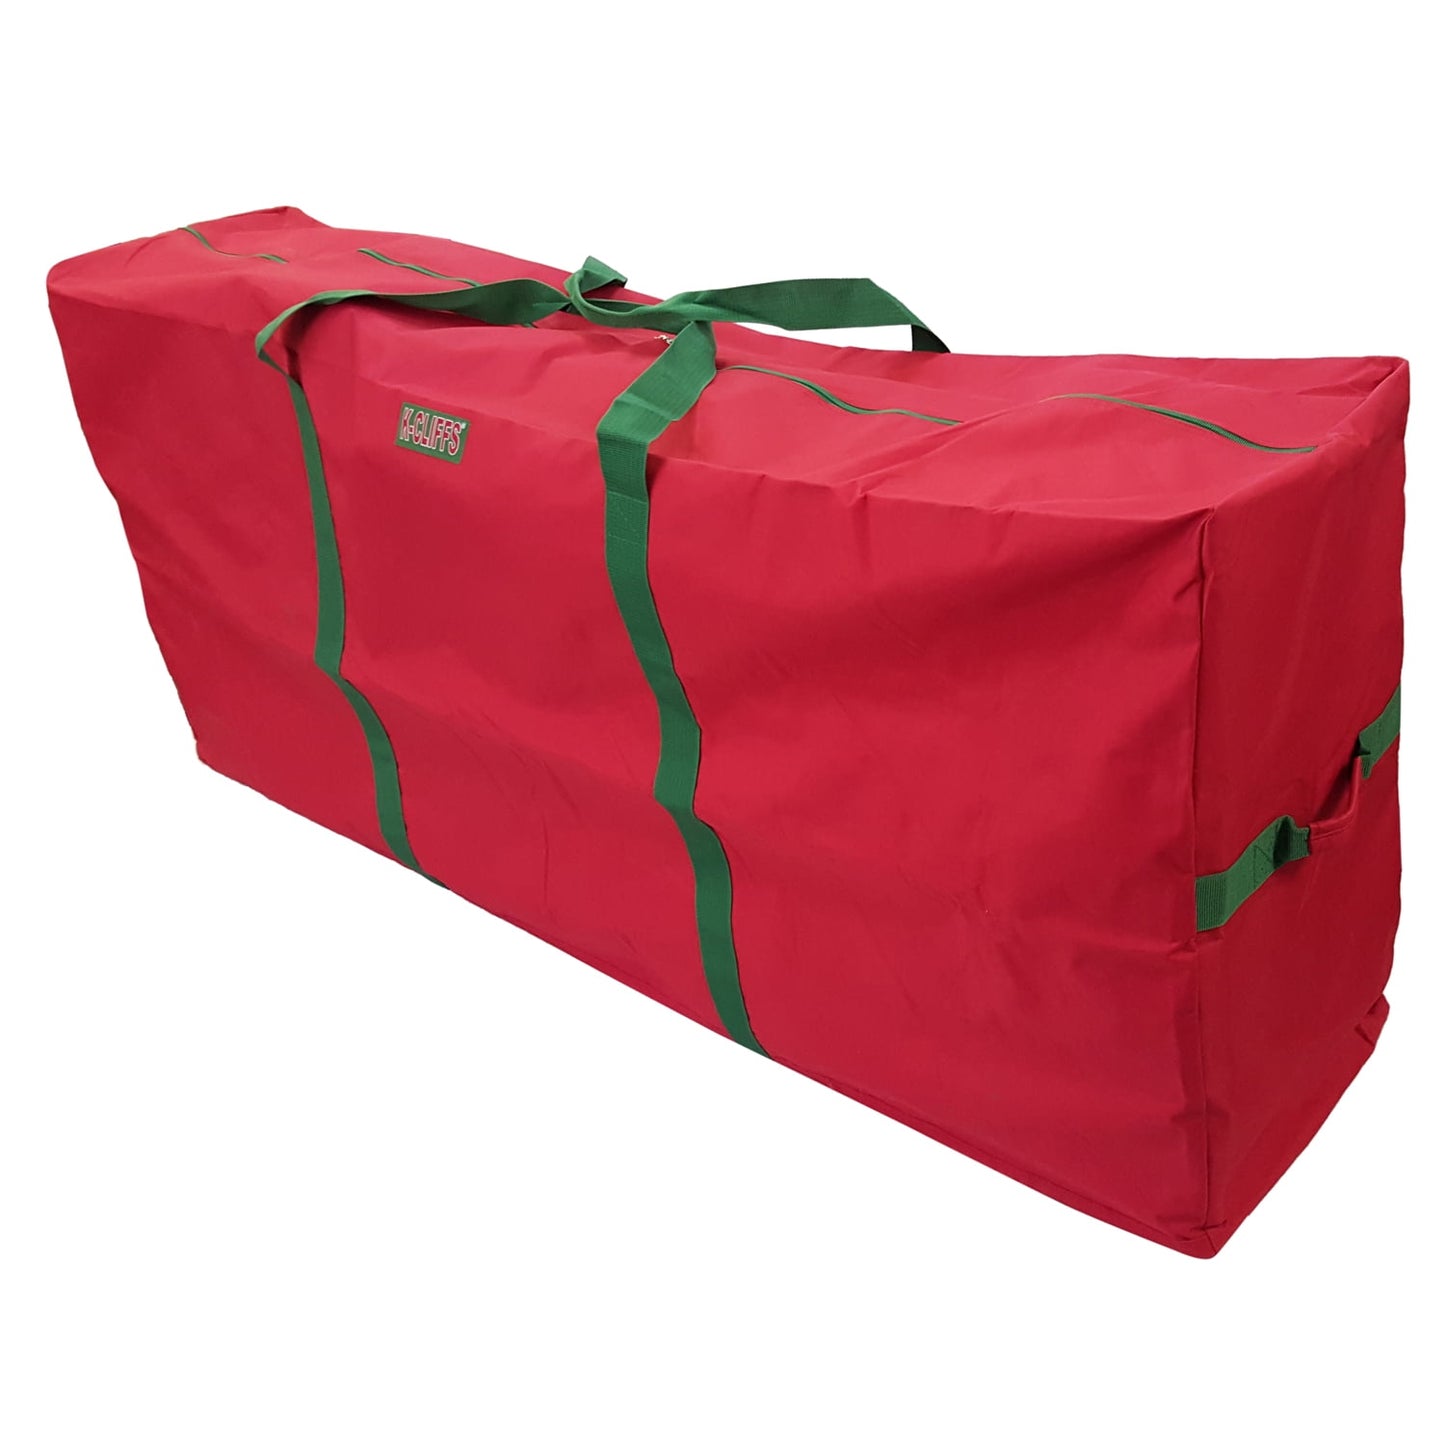 K-cliffs Heavy Duty Christmas Tree Storage Bag Fits up to 9 Foot Tree, Red Extra Large 65inch